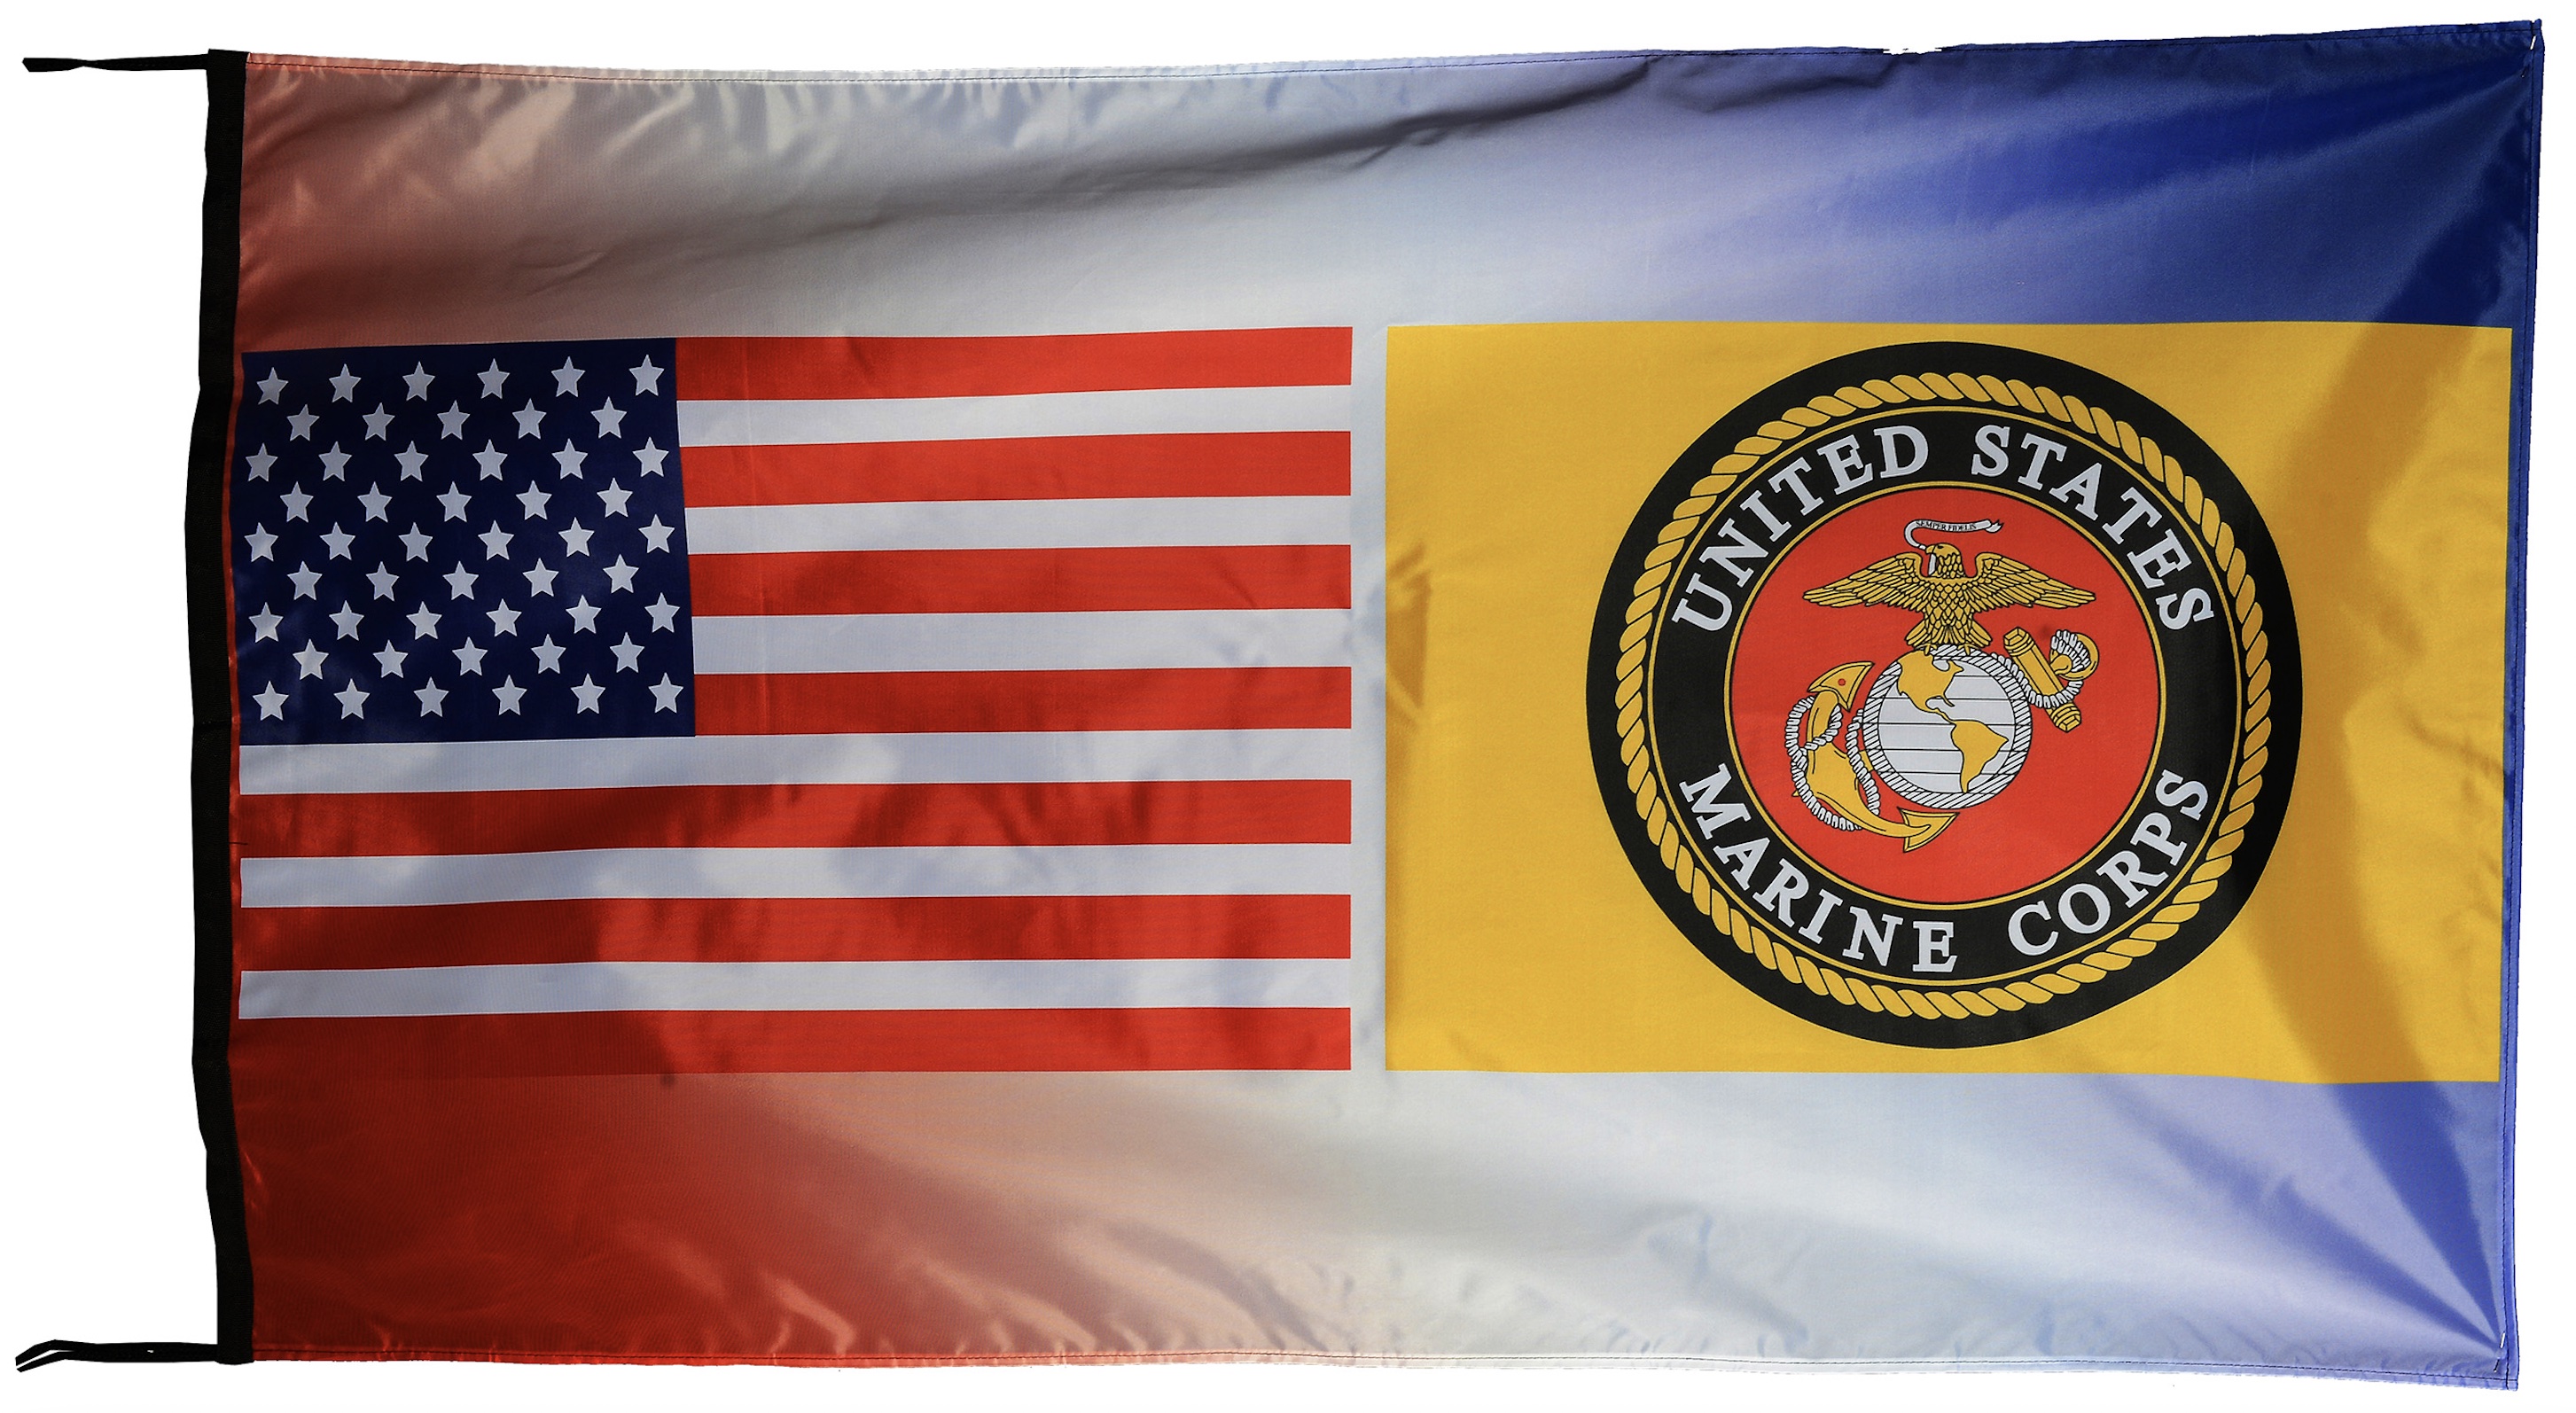 Flag  154 USA / US Country / United States Of America and US United States Marine Corps (Yellow Background) / Patriotic / Pride Hybrid Weather-Resistant Polyester Outdoor Flag Landscape Banner / Vivid Colors / 3 X 5 FT (150 x 90cm) International Flags for Sale